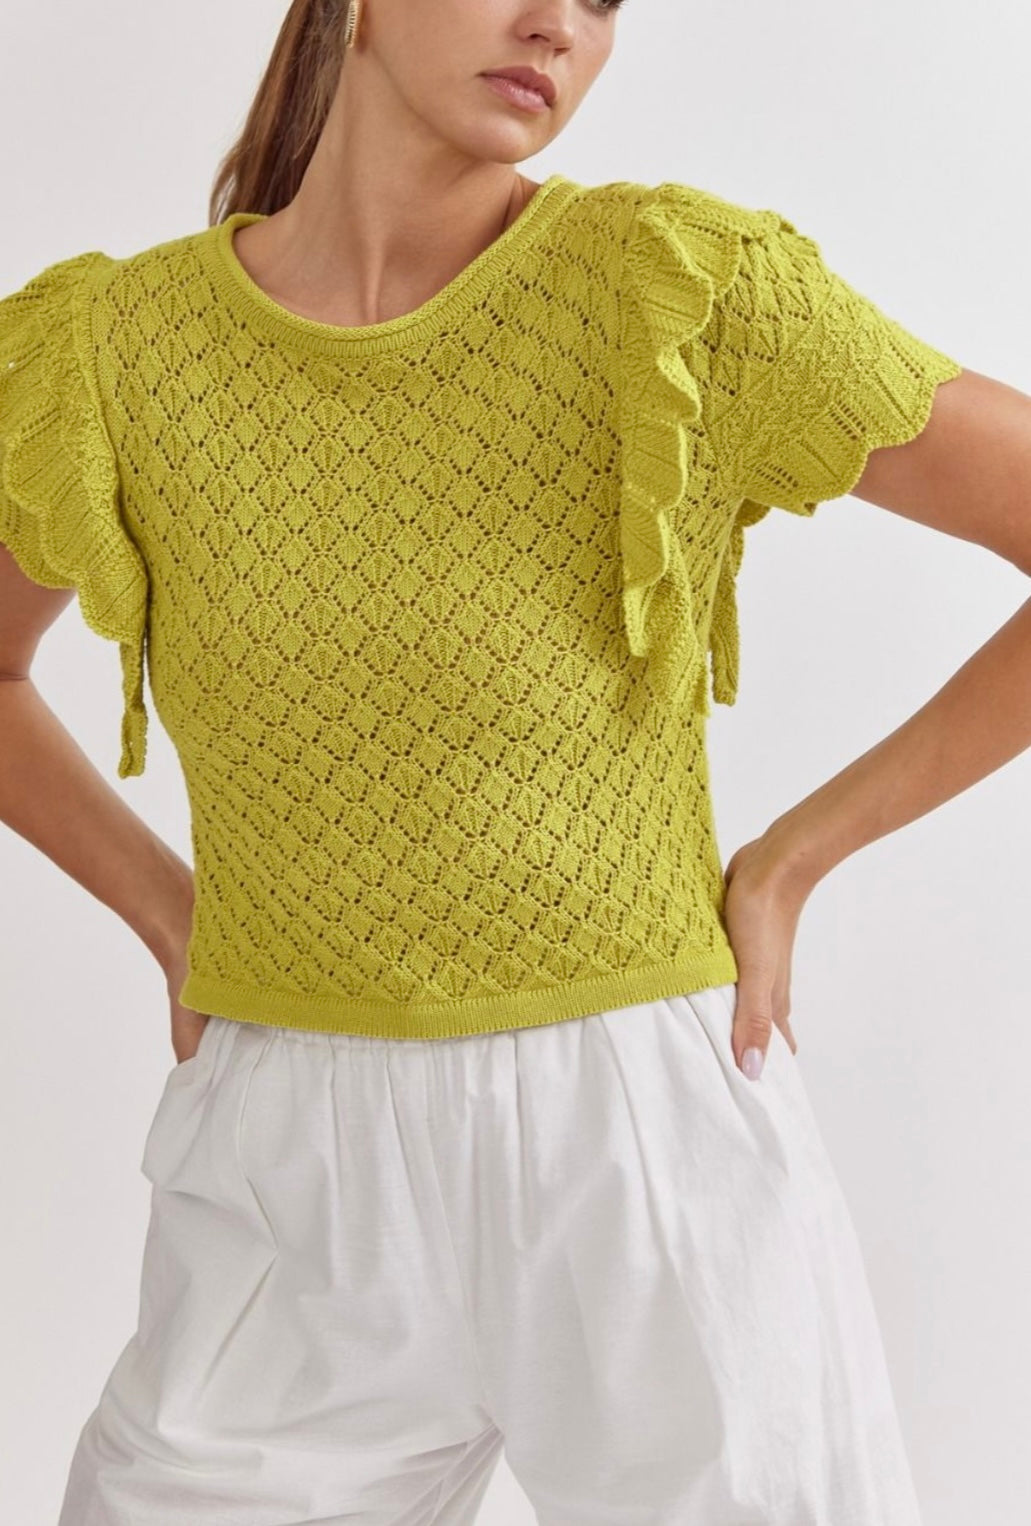 Africa Knit Top - Lime